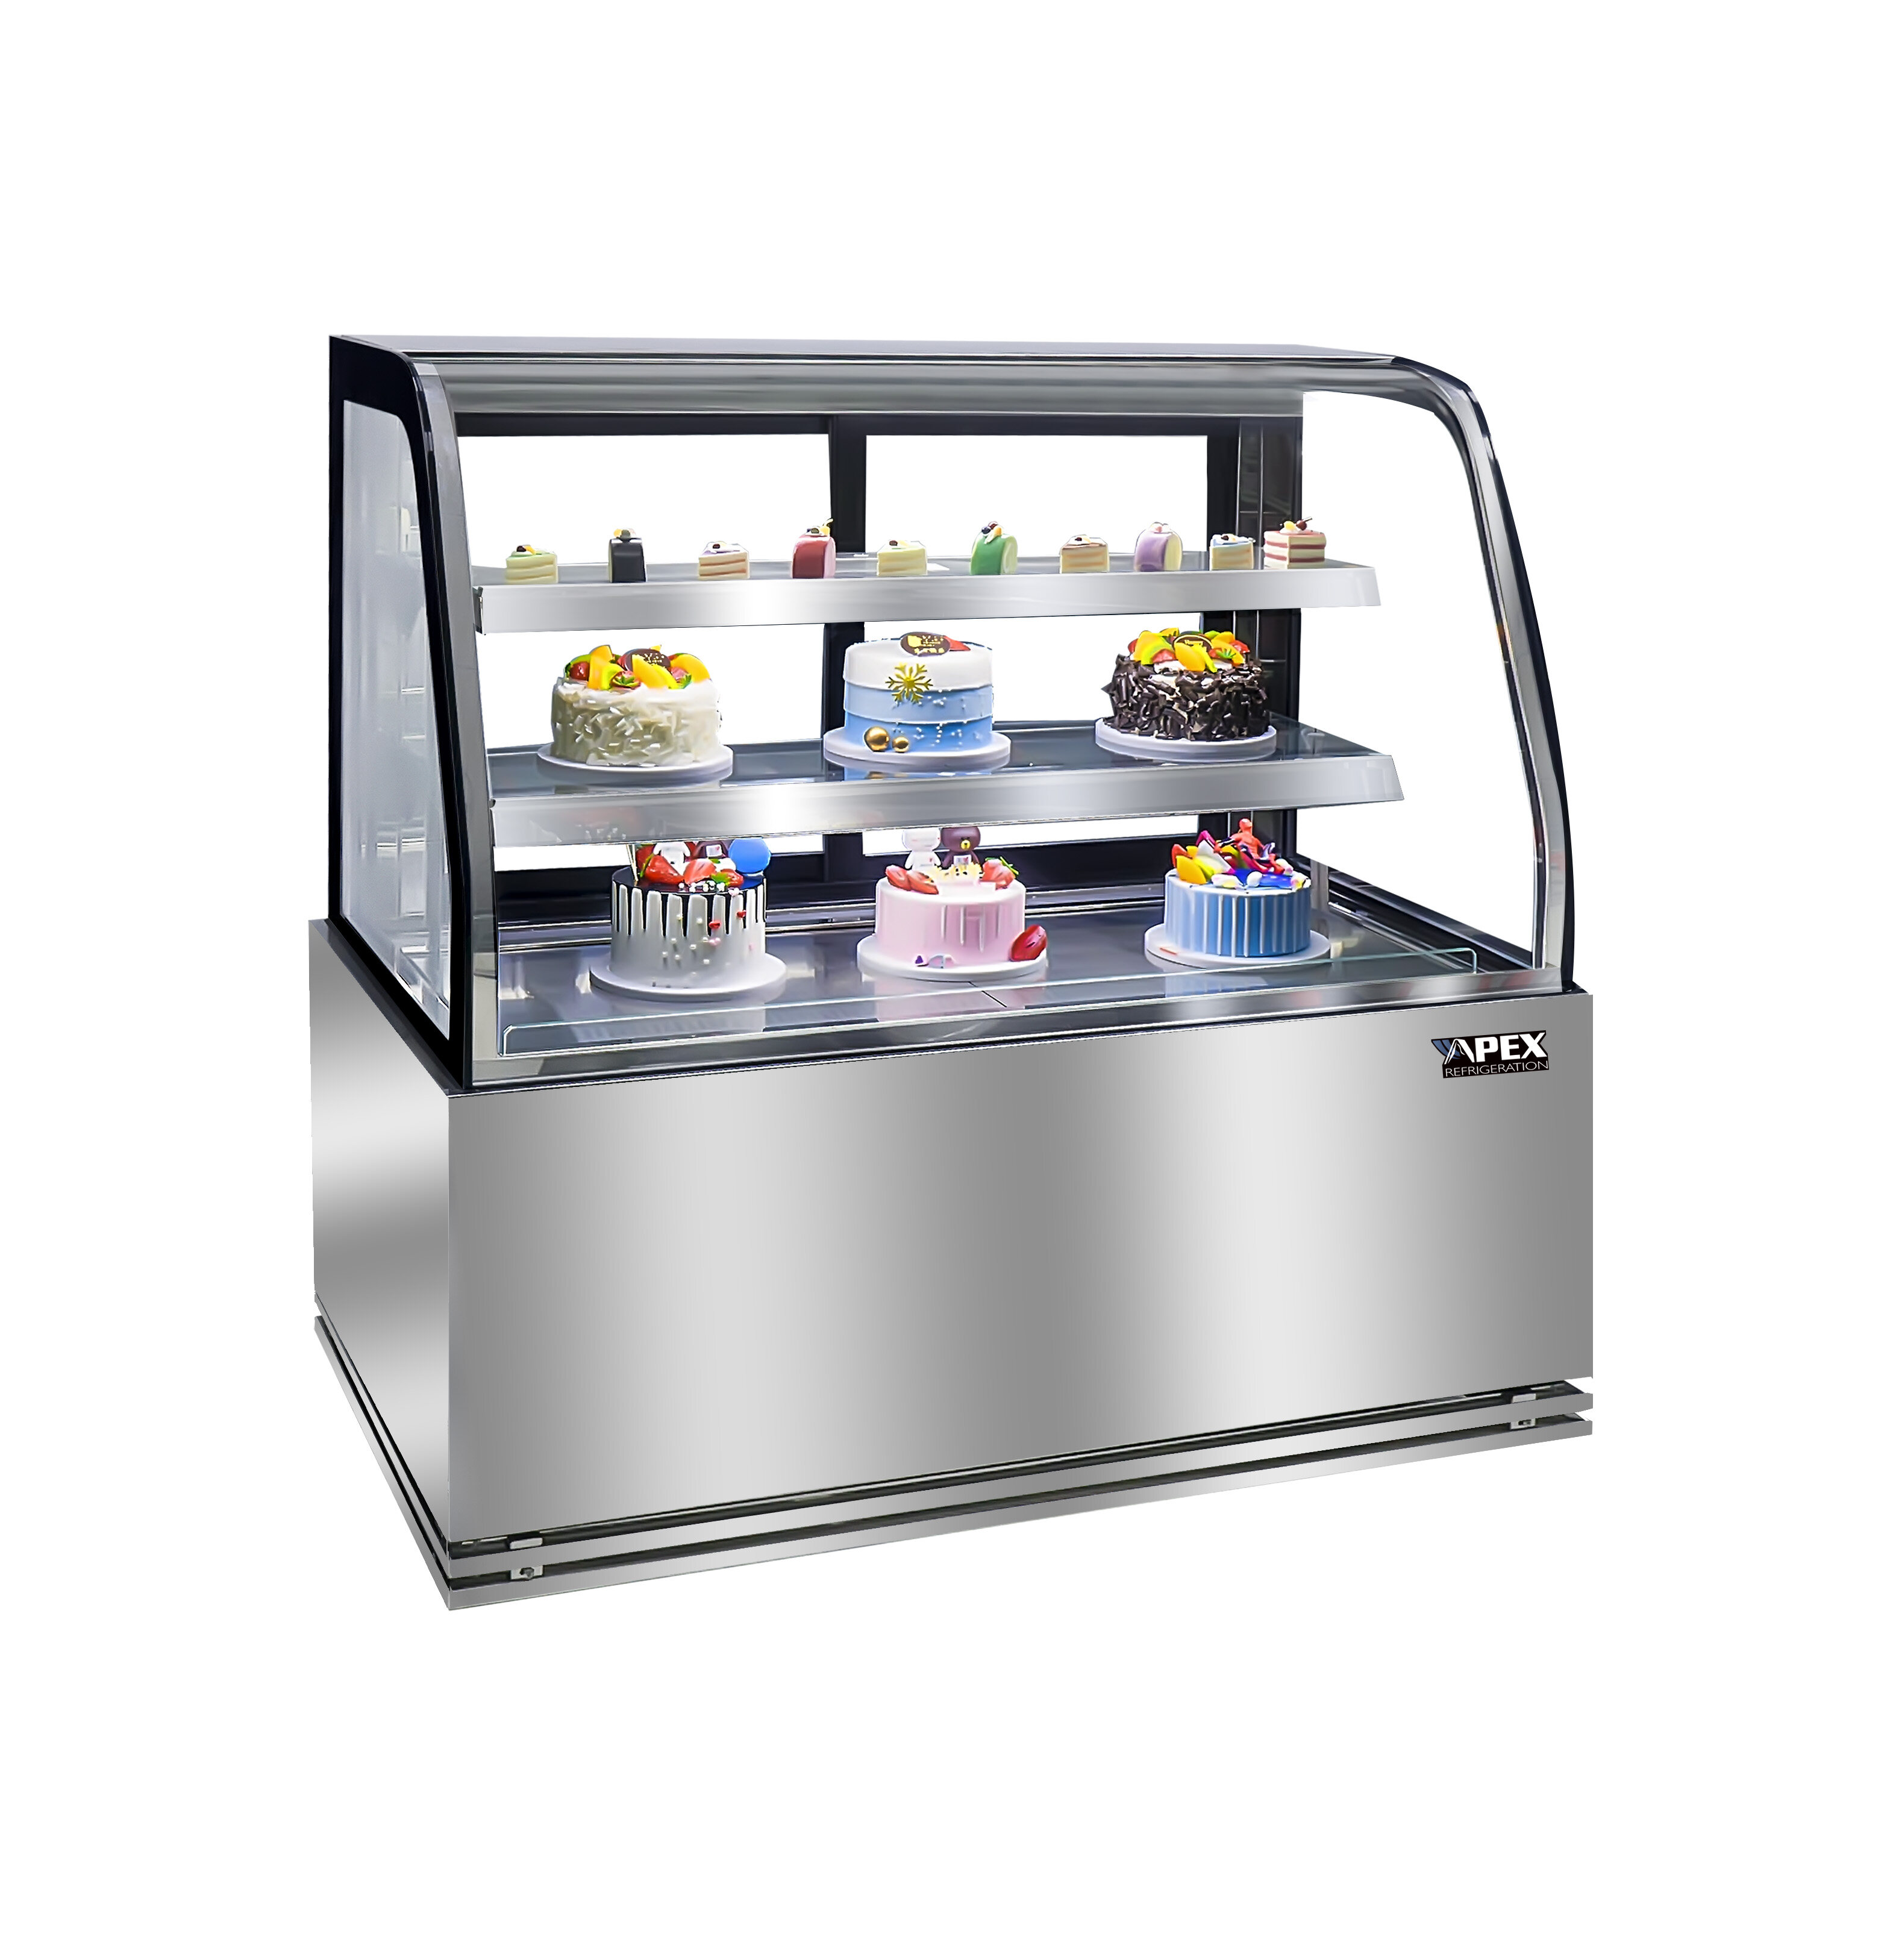 The deli display case should be sanitary and it is best to disinfect regularly